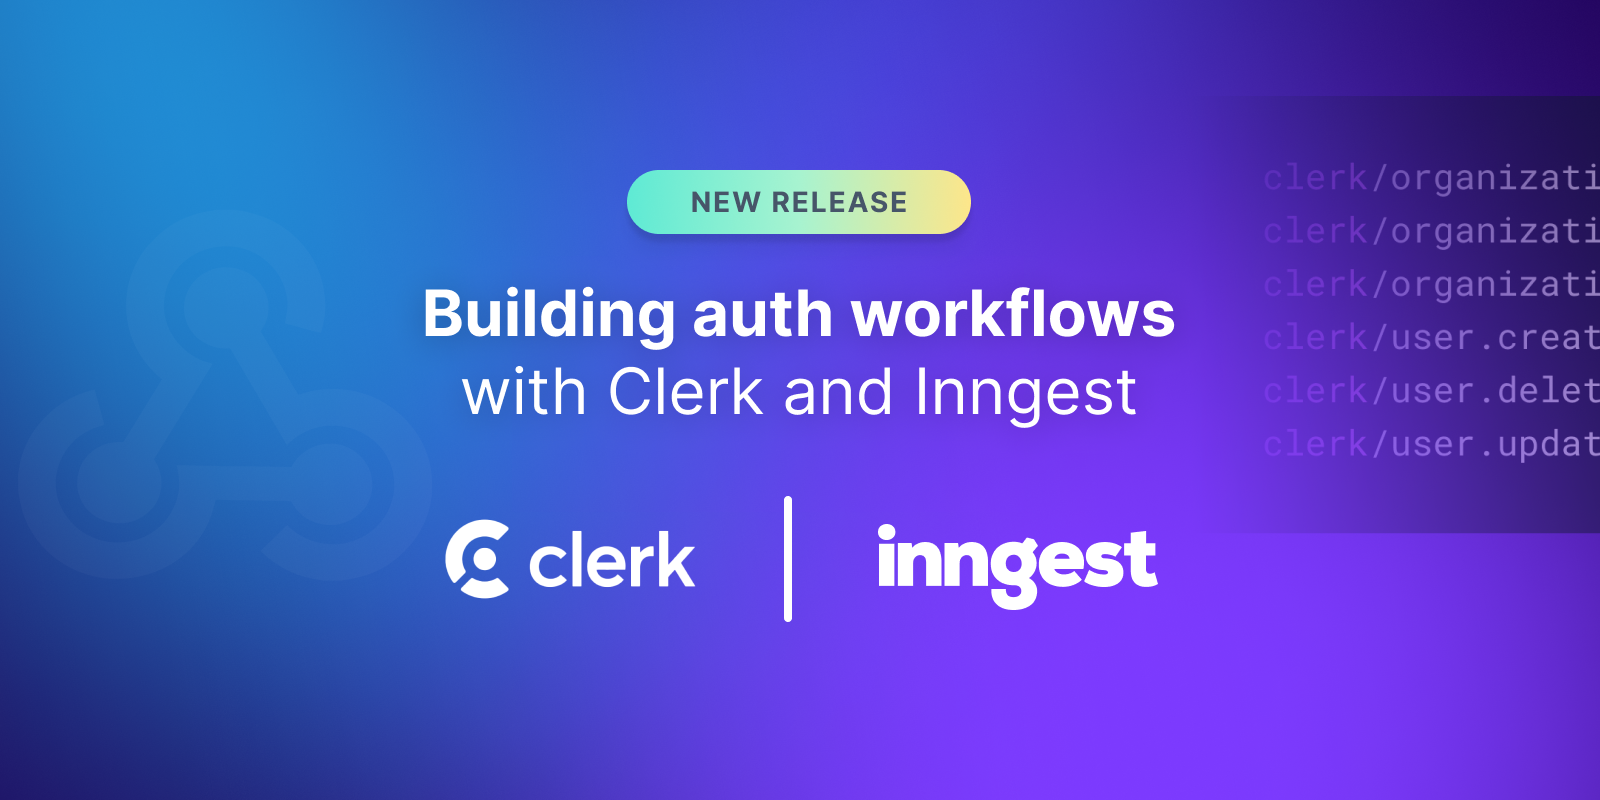 Featured image for Building auth workflows with Clerk and Inngest blog post